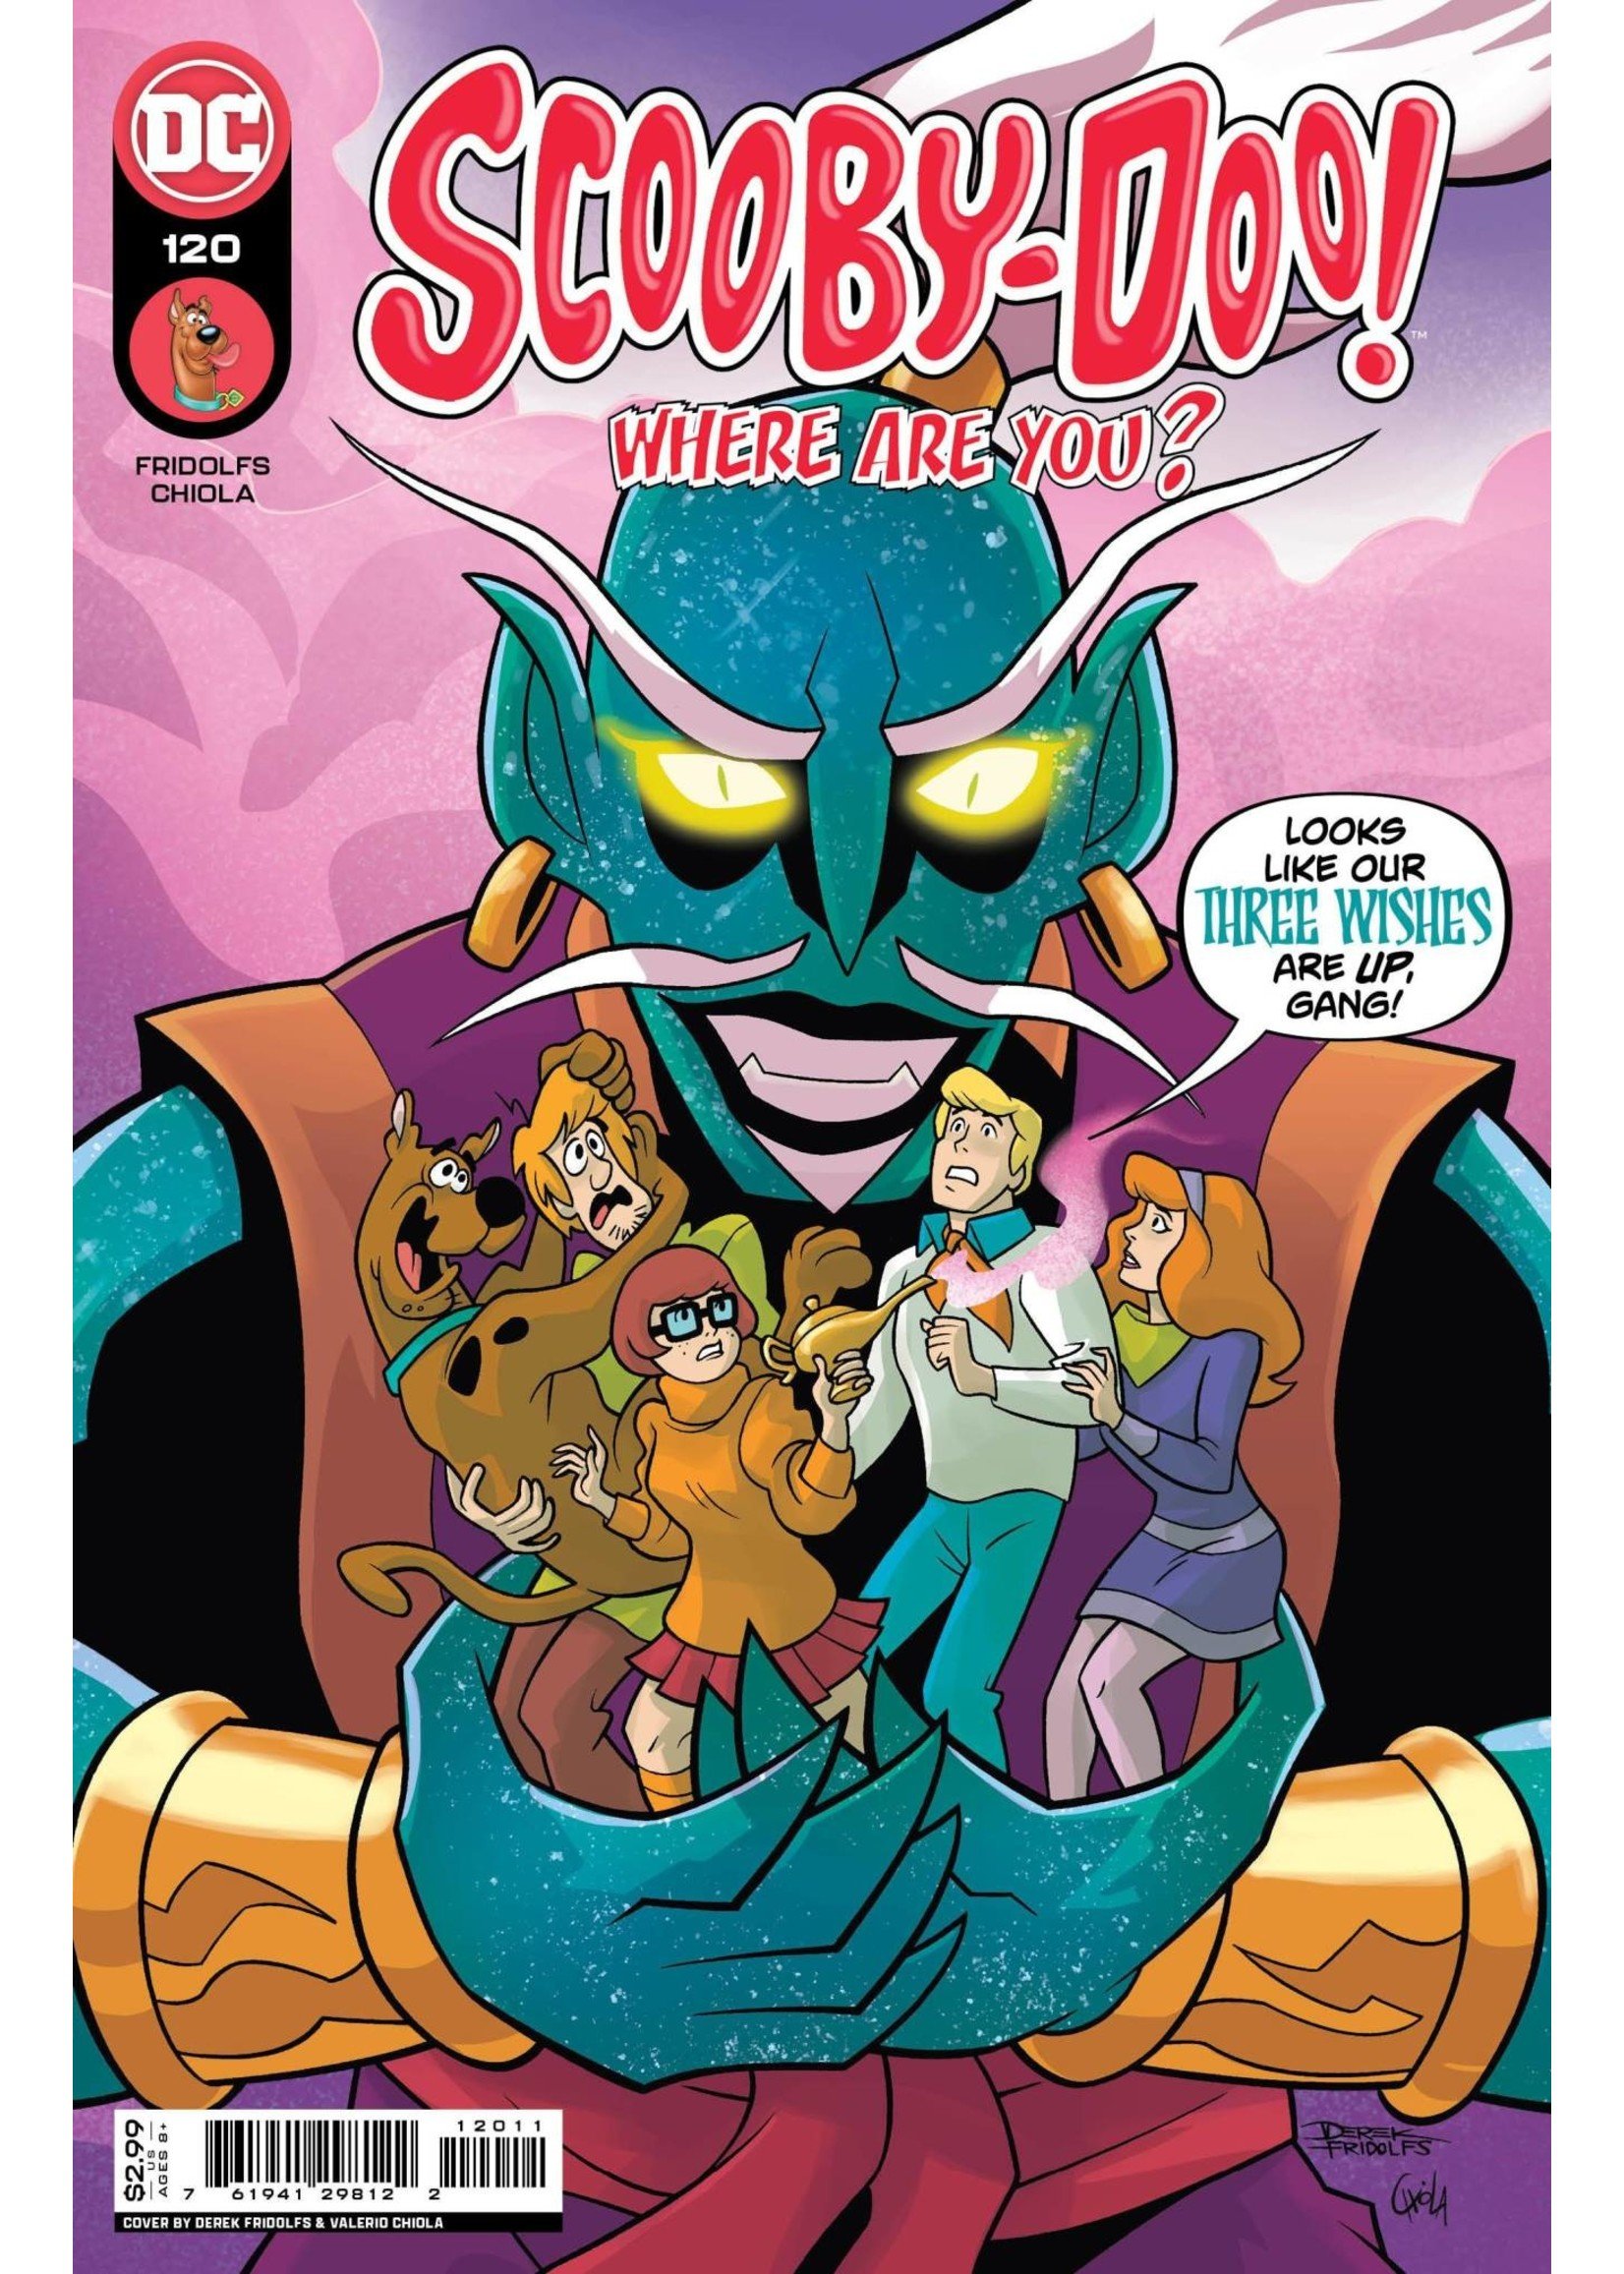 DC COMICS SCOOBY-DOO WHERE ARE YOU? #120